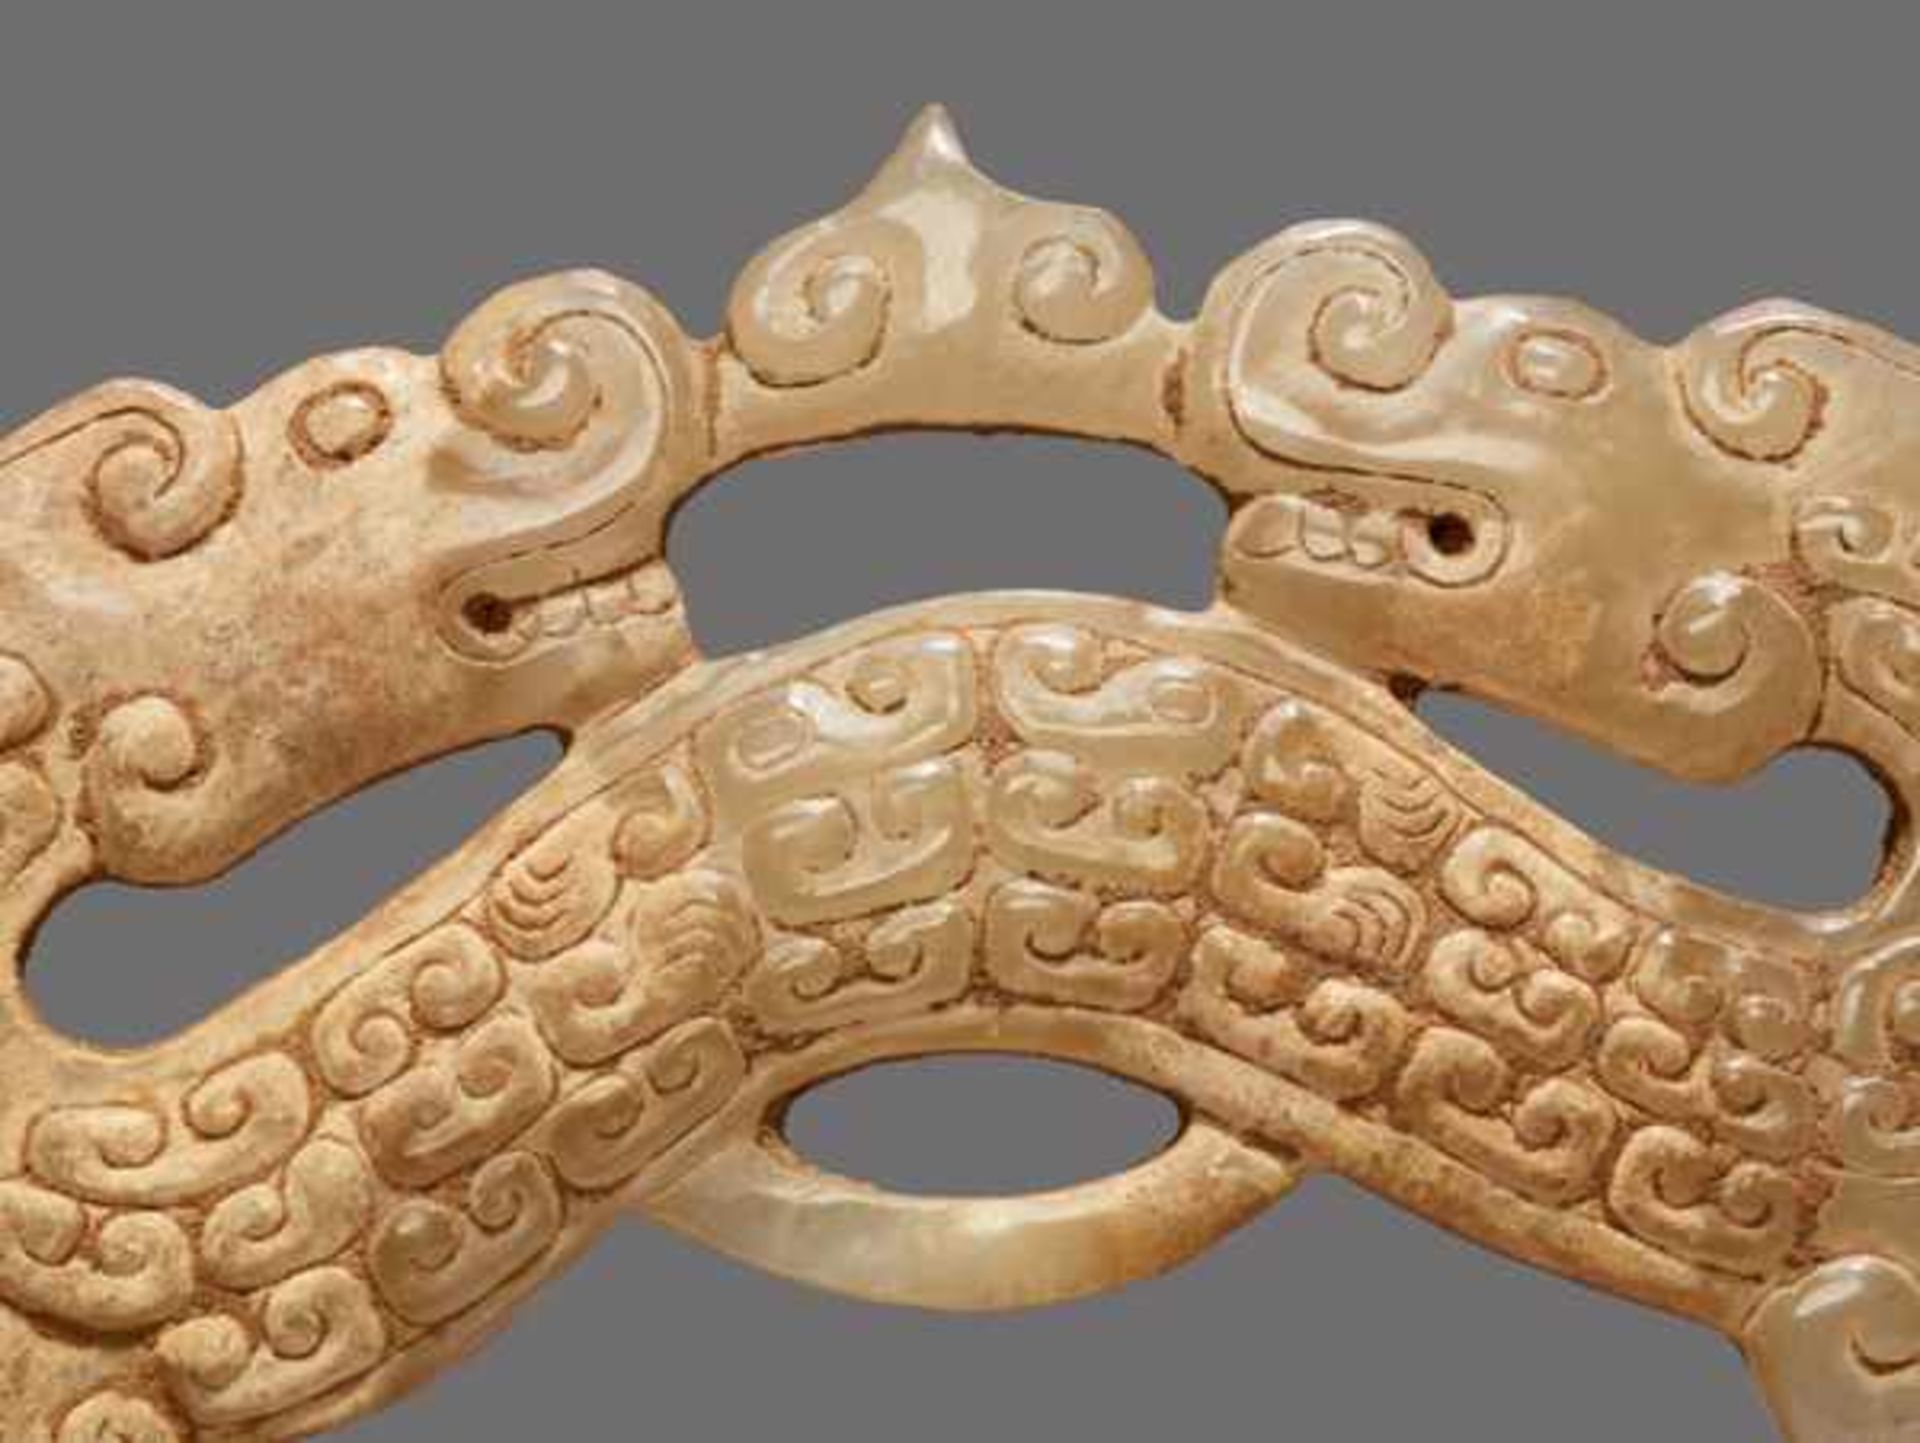 AN UNUSUAL ARCHED DRAGON-SHAPED ORNAMENT IN OPENWORK WITH A FINE POLISH Jade, China. Eastern Zhou, - Image 4 of 7